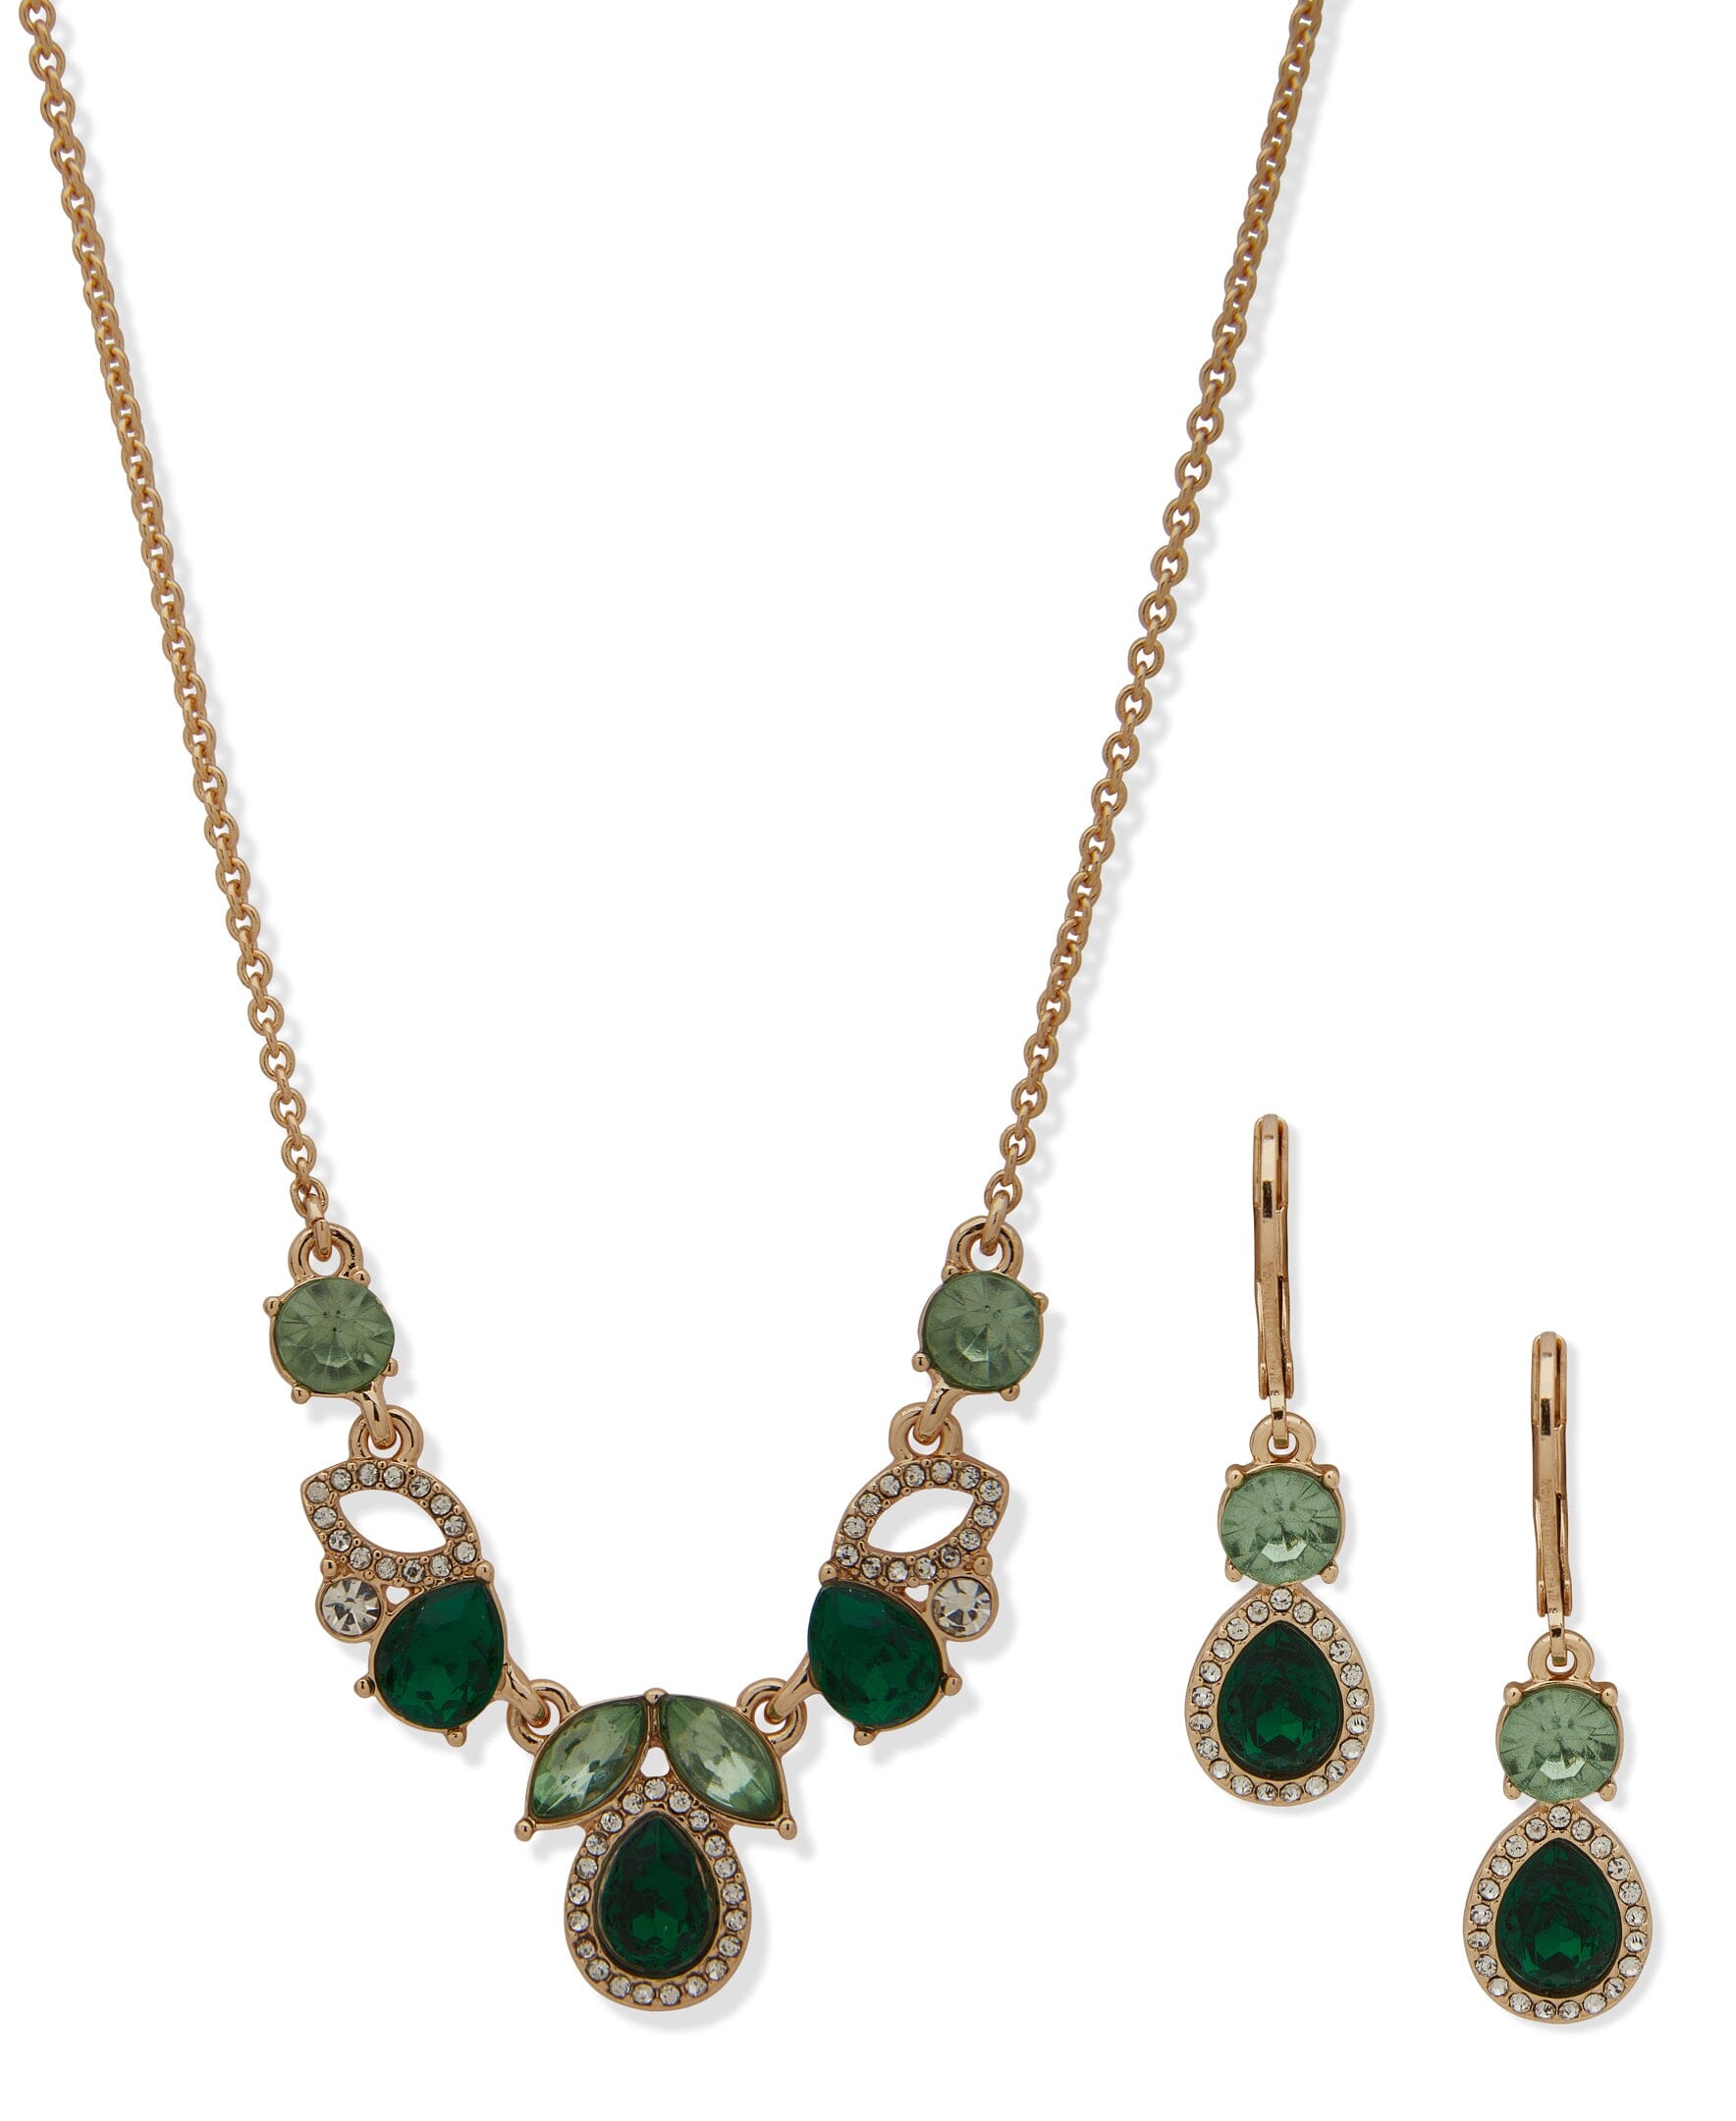 Exquisite Kutch inspired jali, green stone and hammered finish drop earrings  – Lai